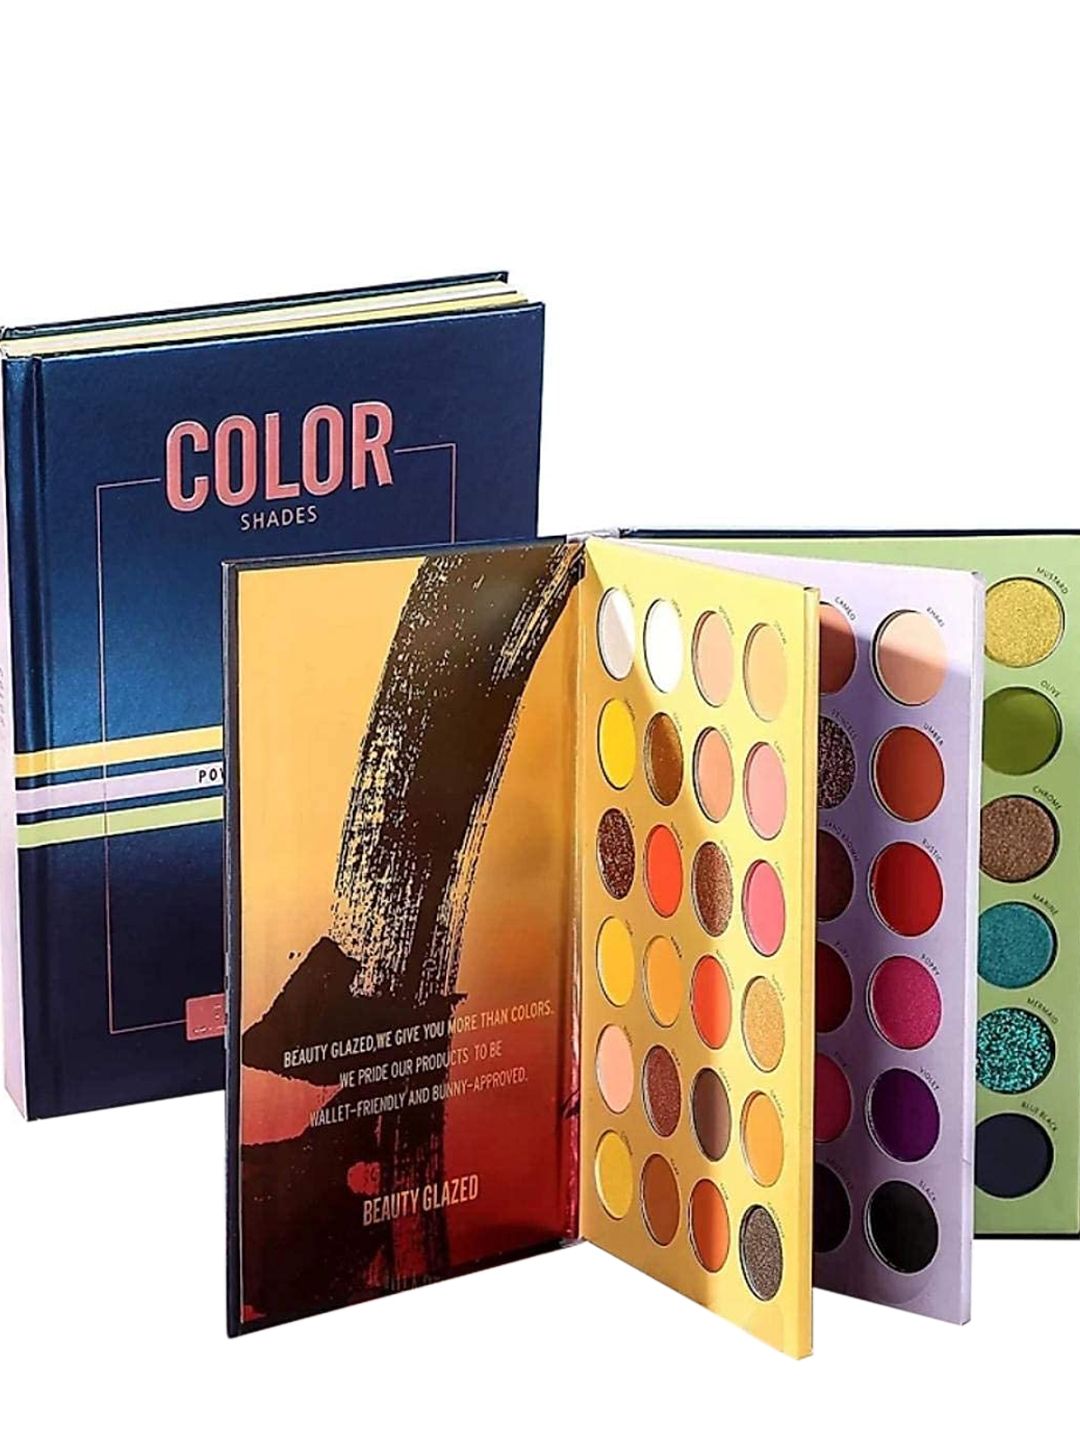 BEAUTY GLAZED Color Shades Book 72 Color Eyeshadow Palette Price in India